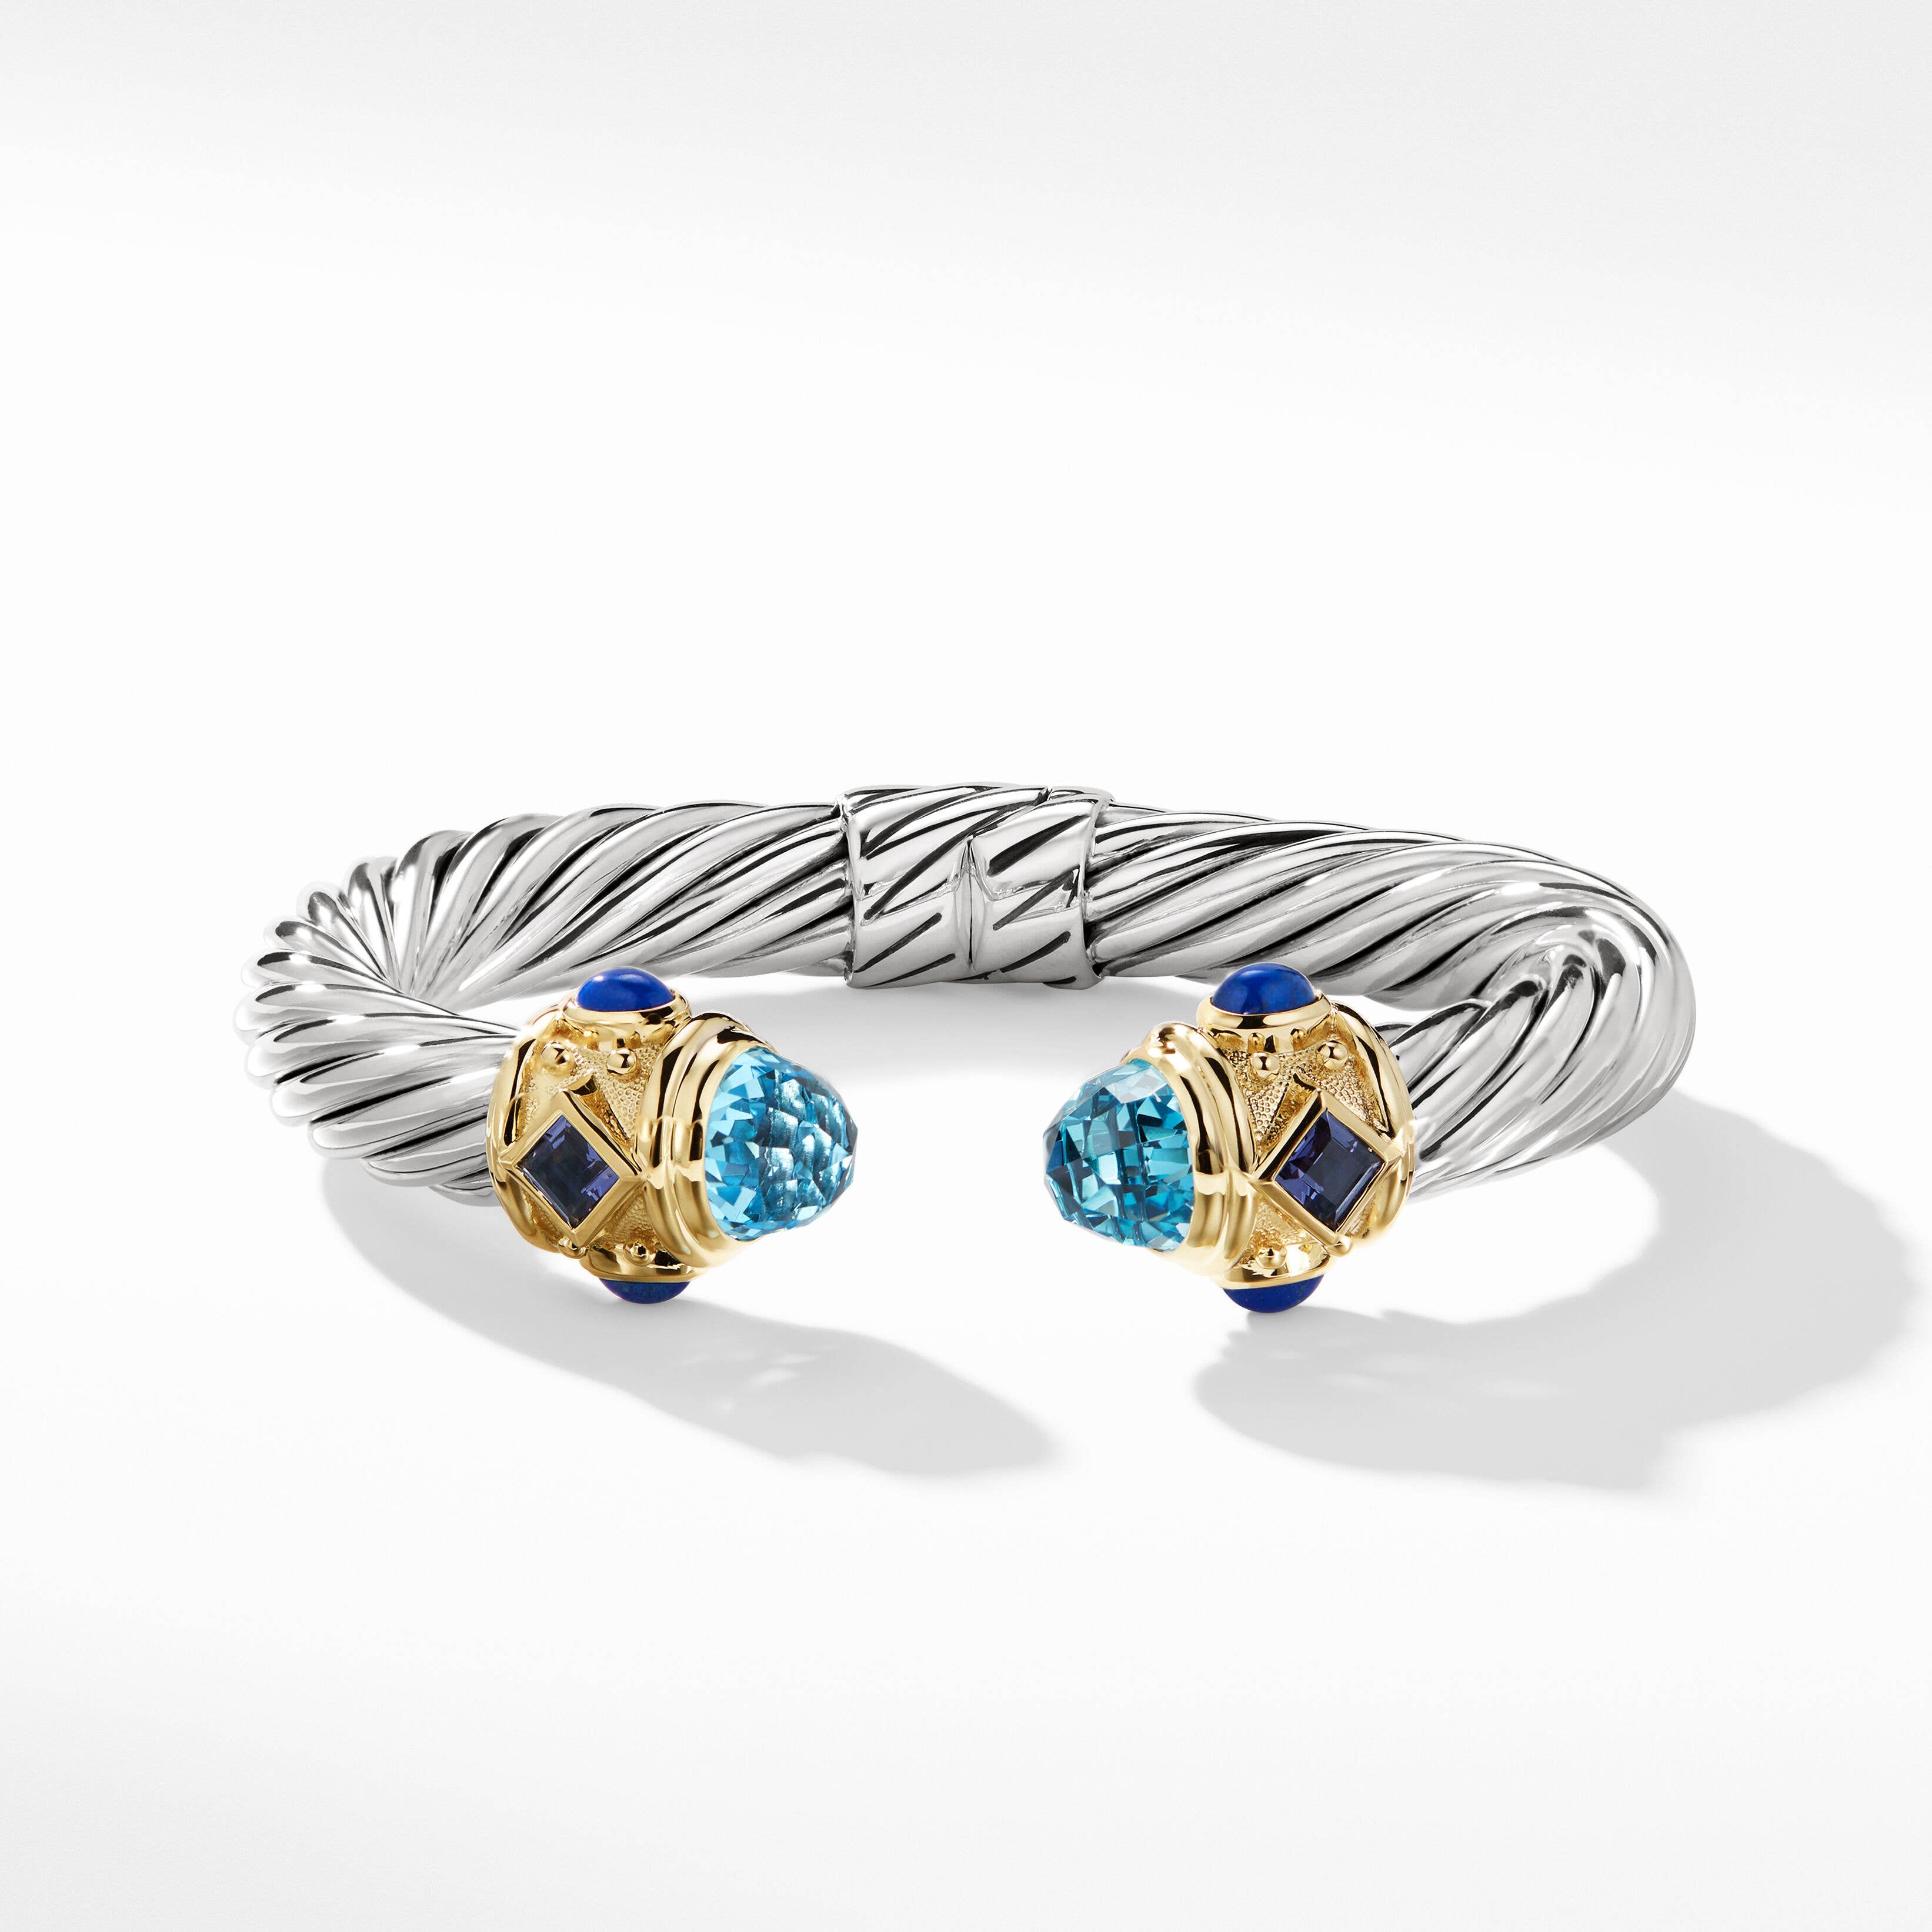 Renaissance® Bracelet in Sterling Silver with Blue Topaz, Iolite, Lapis and 14K Yellow Gold